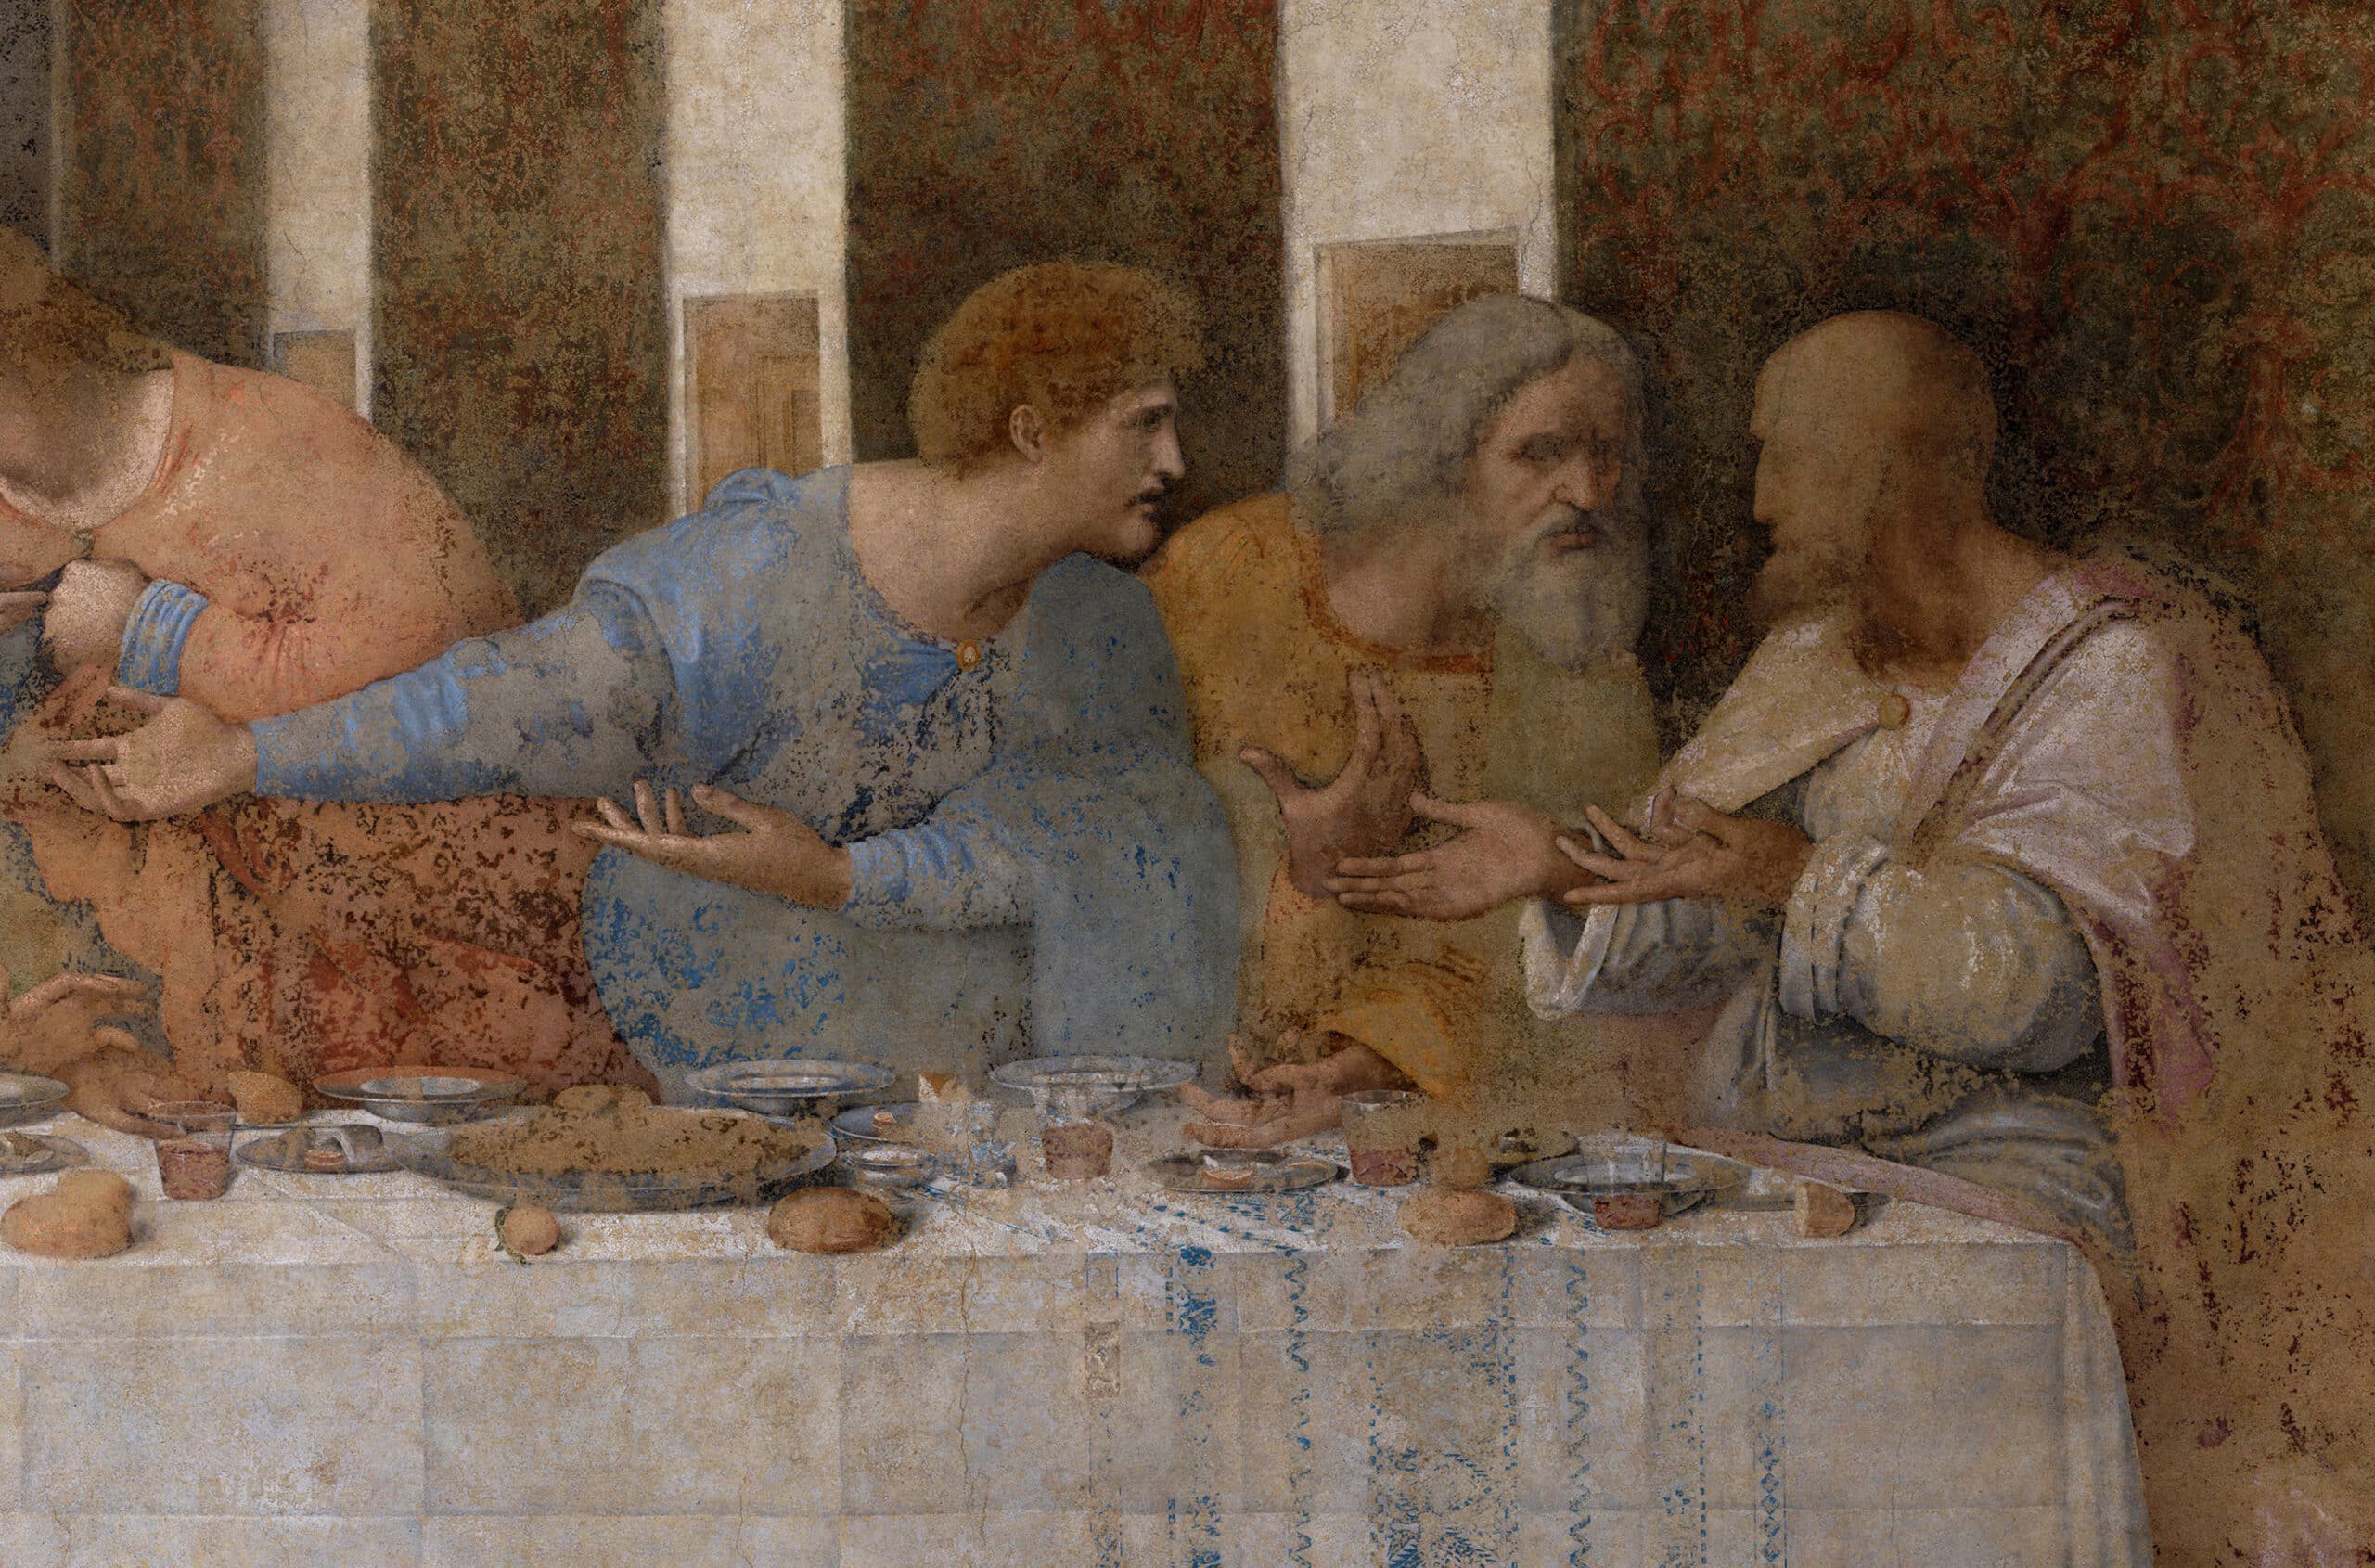 Matthew, Thaddeus, and Simon (right side) - the last supper painting analysis